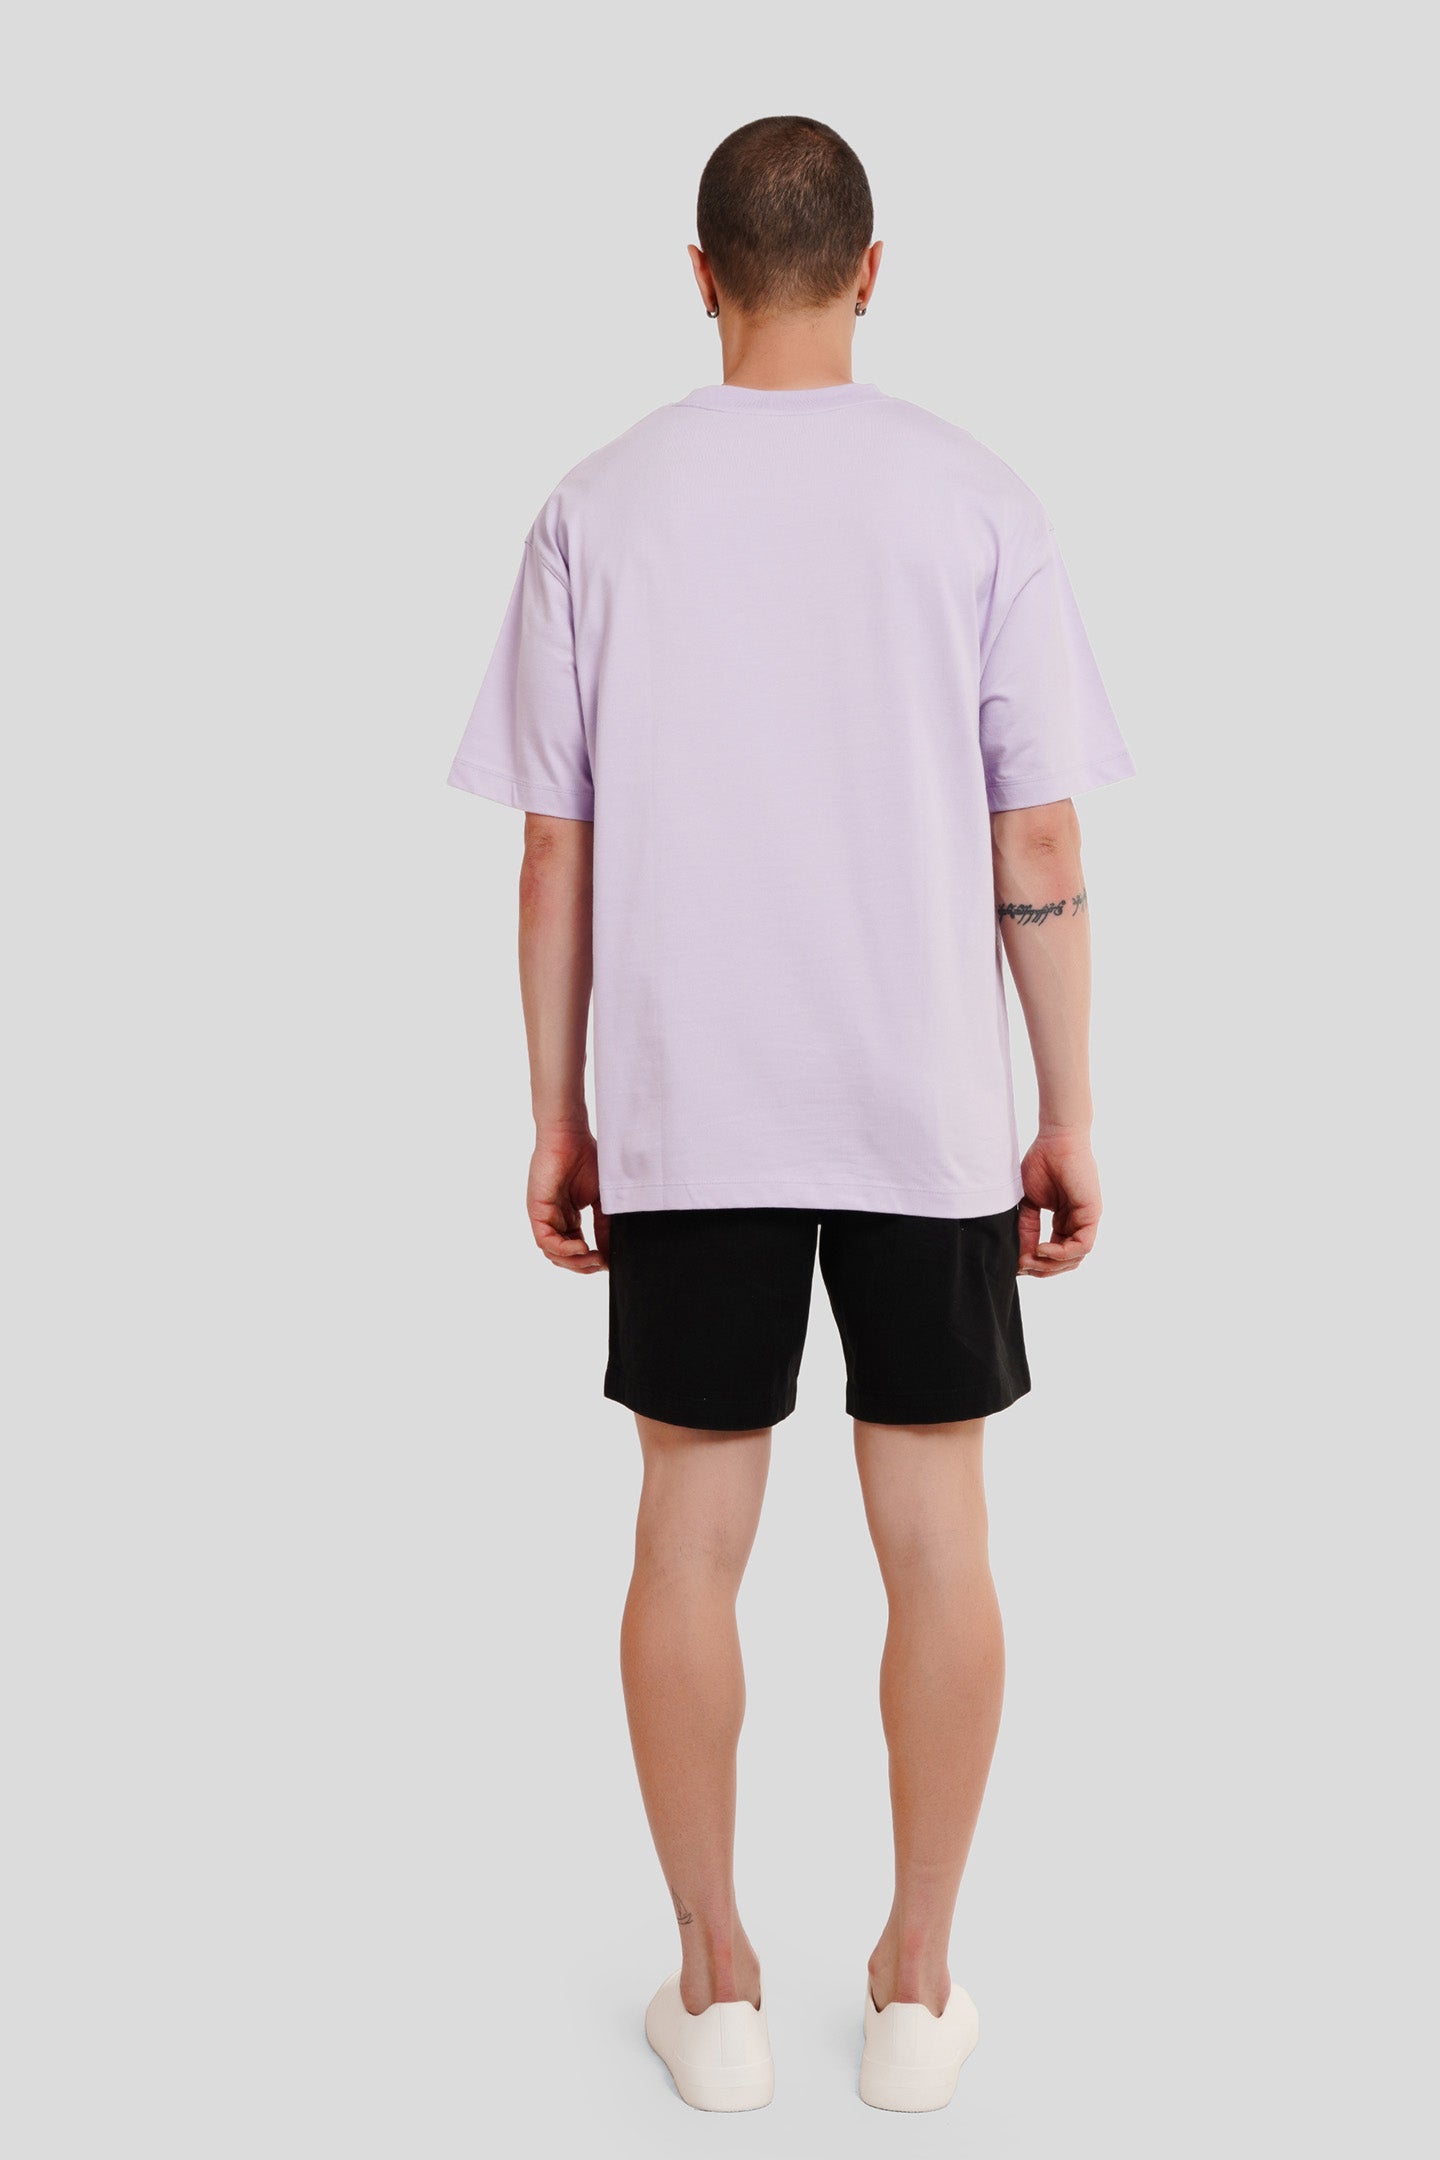 Make Things Happen Lilac Printed T Shirt Men Oversized Fit With Front Design Pic 5